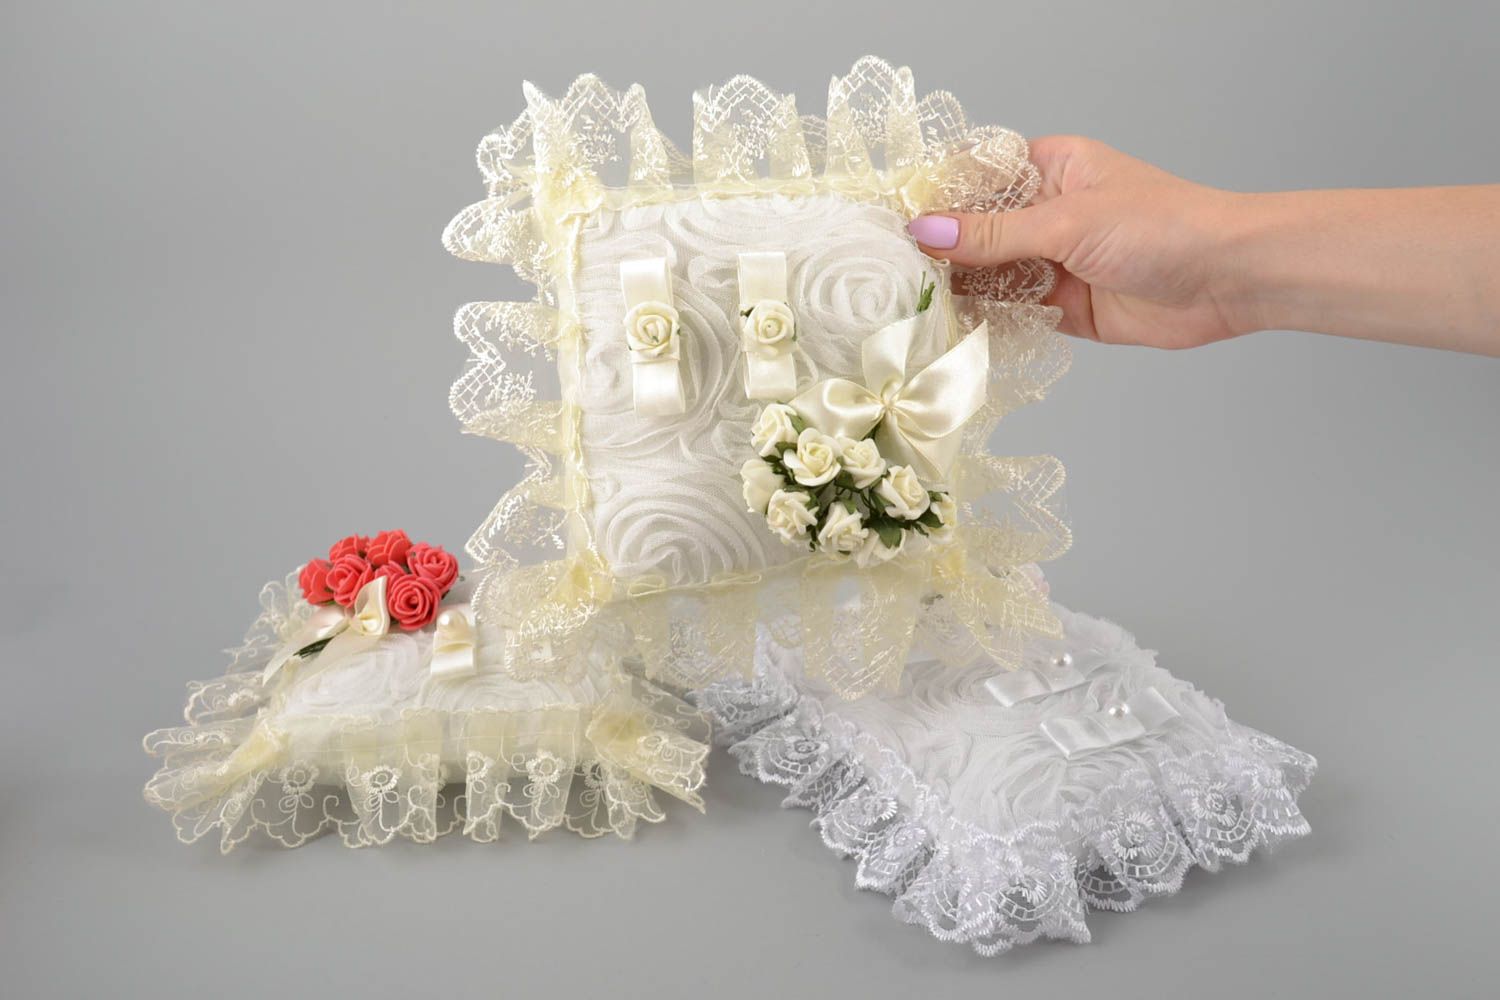 Handmade wedding openwork set of white pillows for rings with flowers 3 pieces photo 5